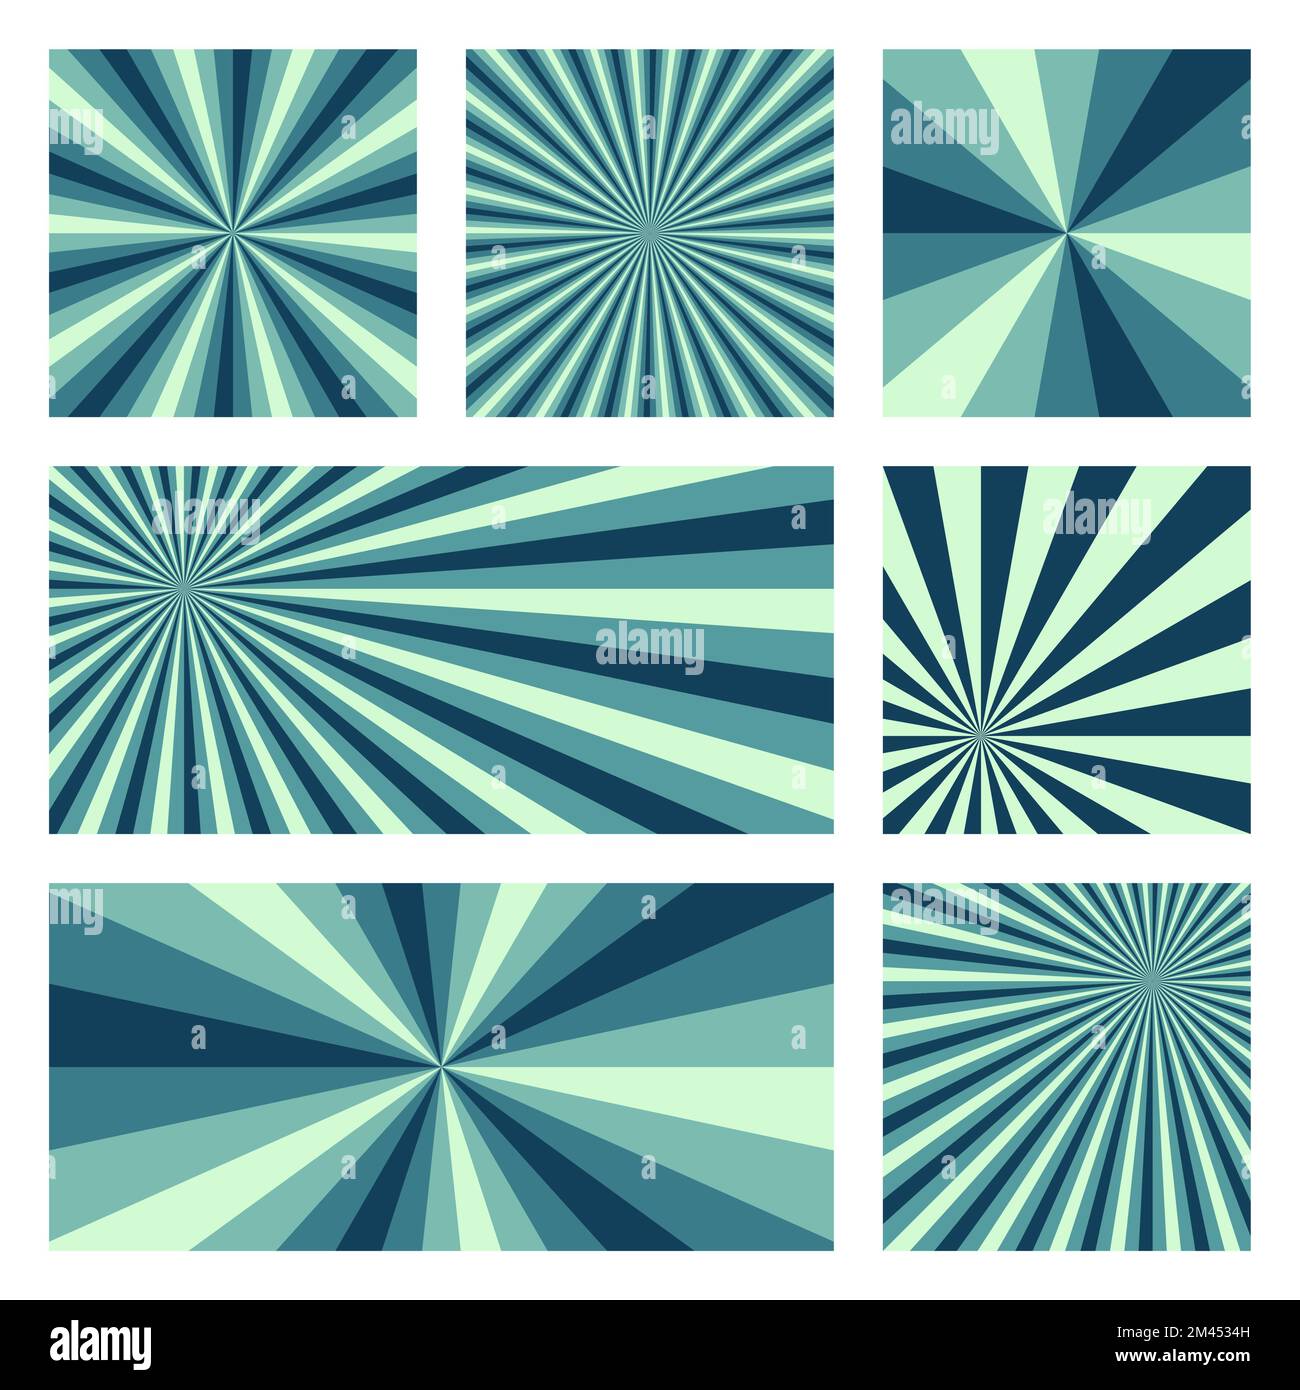 Amazing sunburst background collection. Abstract covers with radial rays. Cool vector illustration. Stock Vector